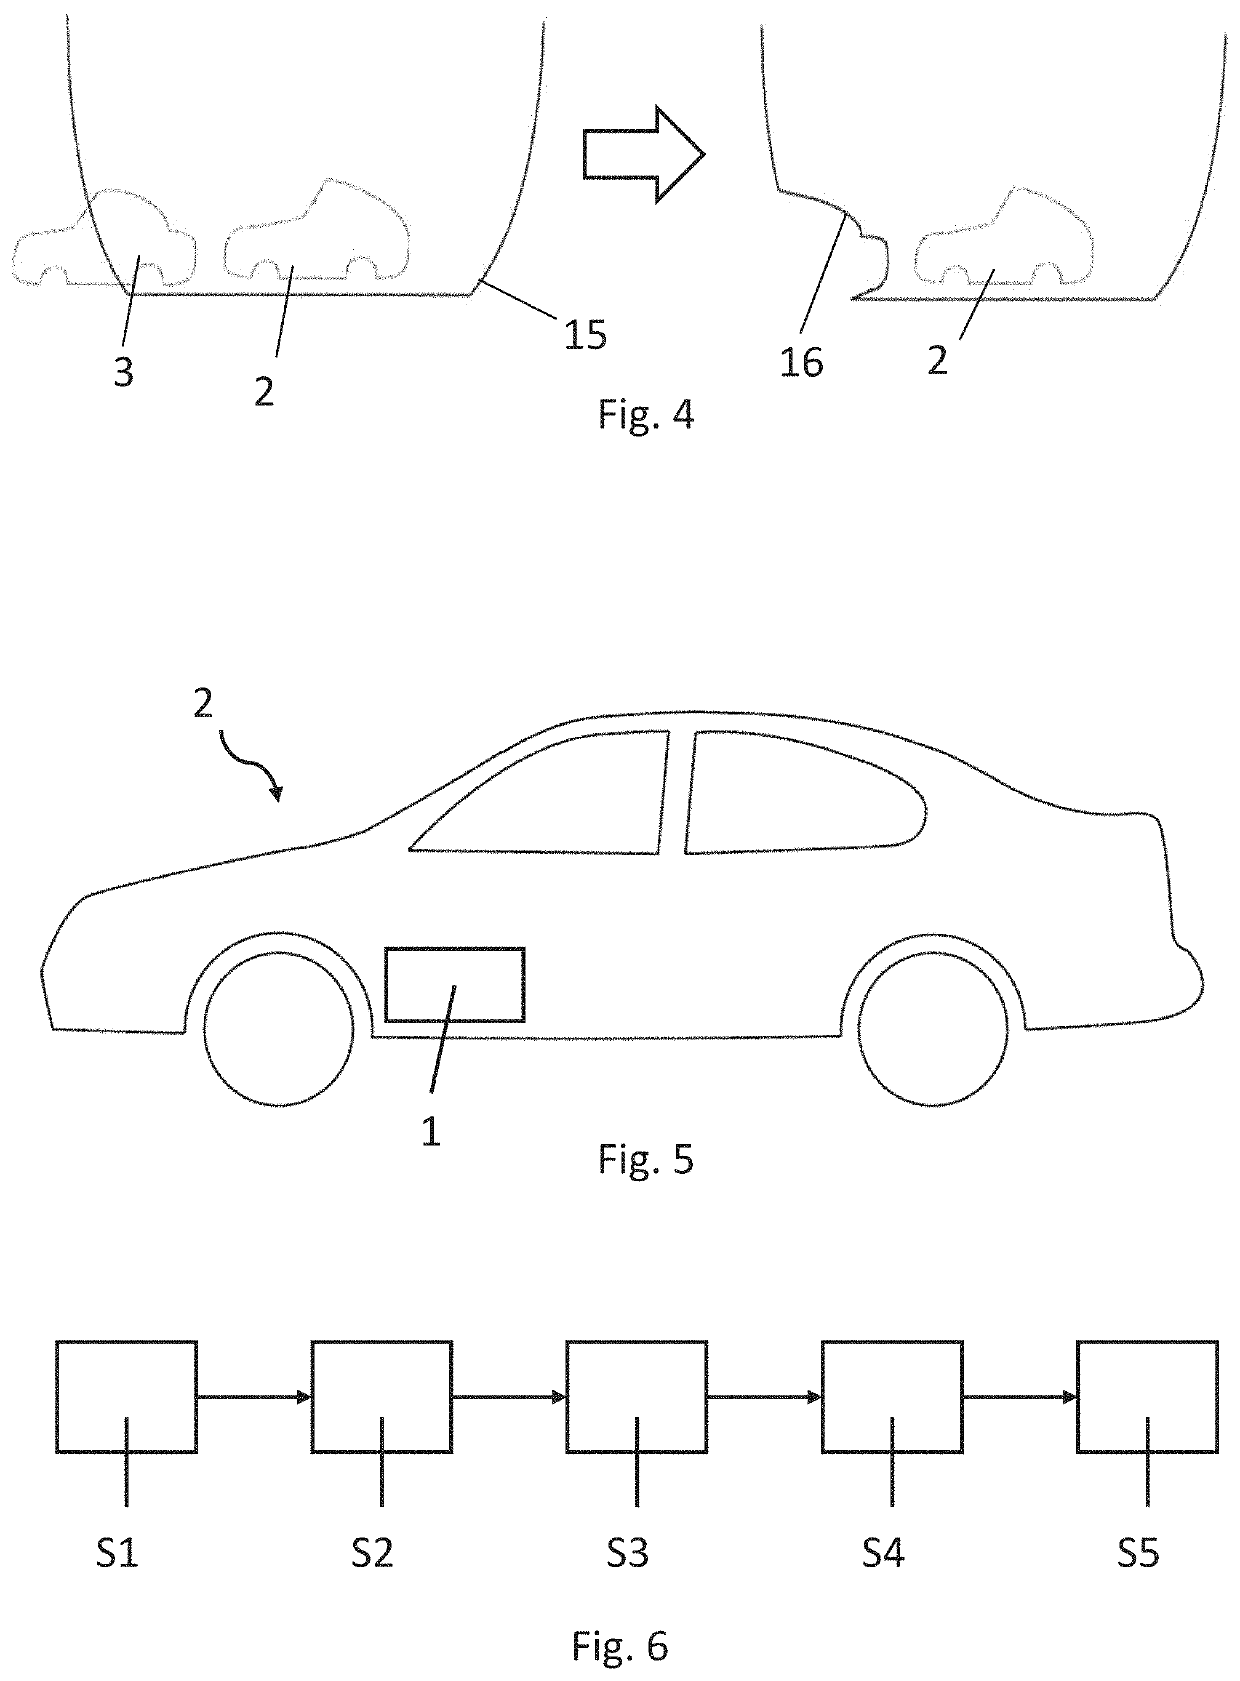 Surround view system having an adapted projection surface